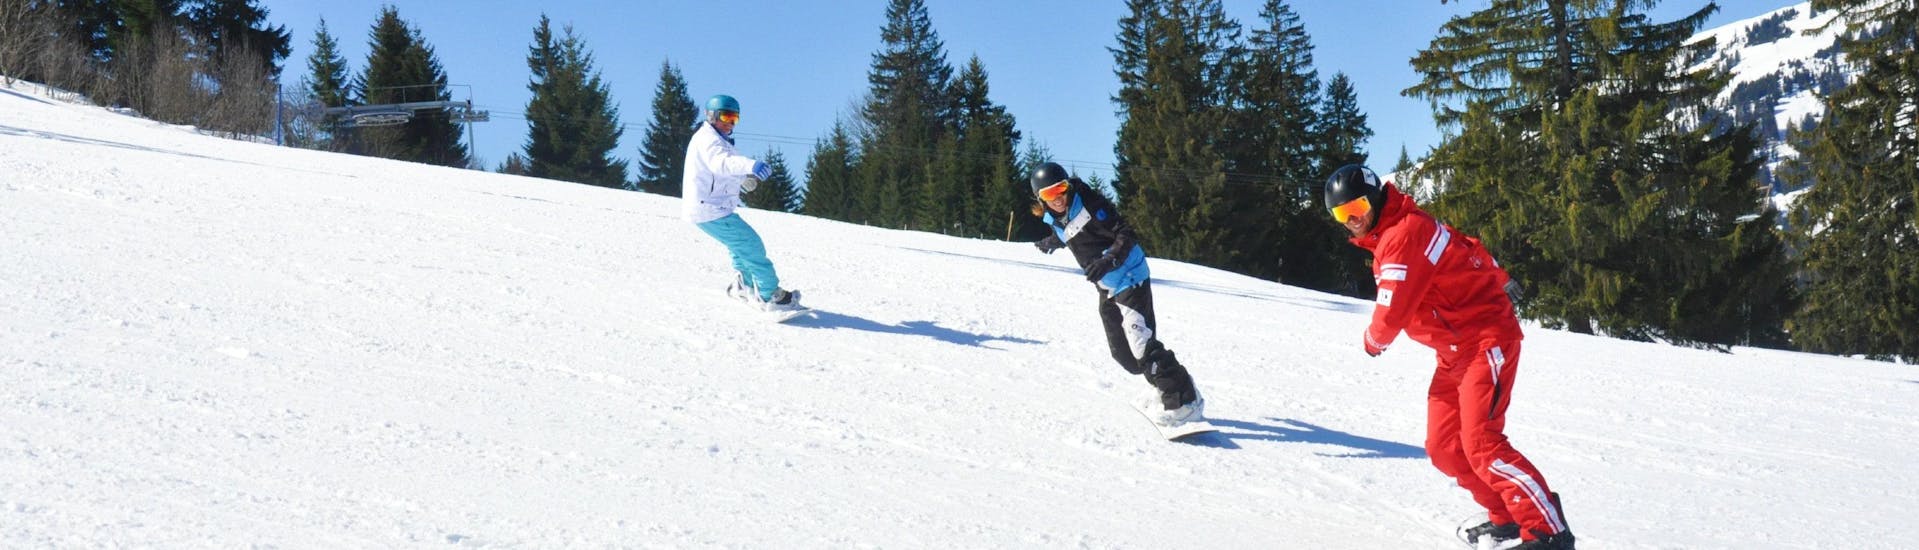 Snowboarders are following their snowboarding instructor on the slope during their Private Snowboarding Lessons for All Levels with the ski school ESS Château d'Oex.